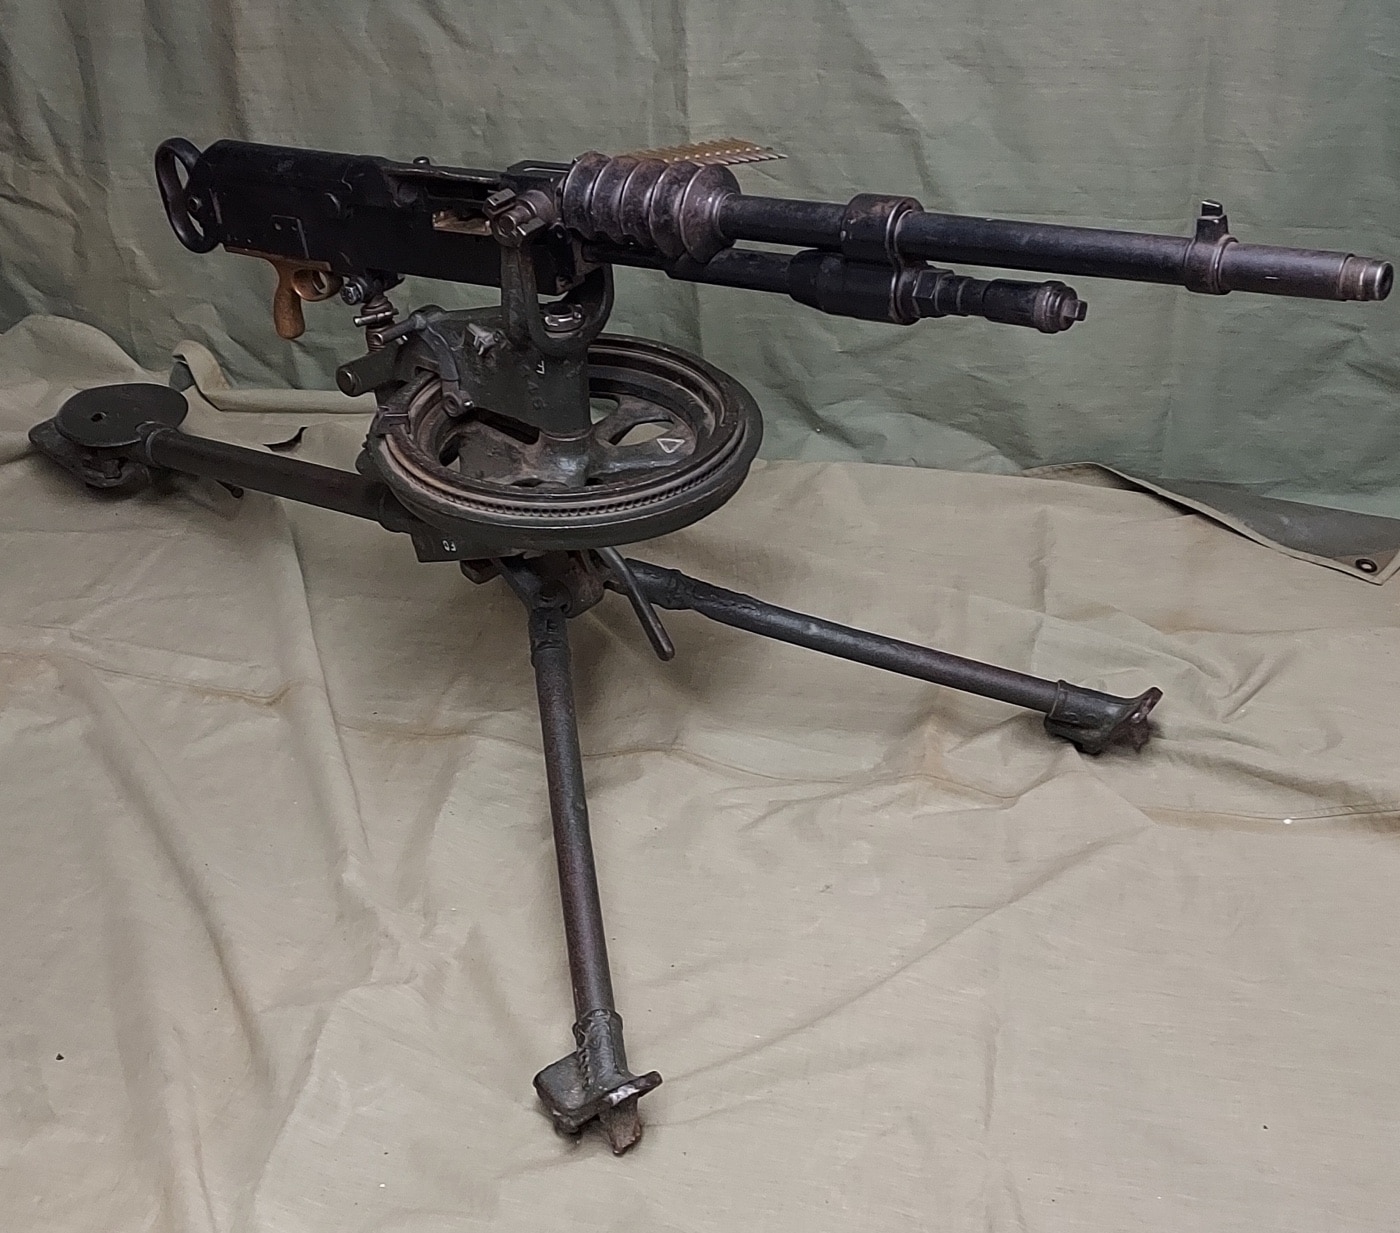 This is a photo of the author's MLE 1914 Hotchkiss machine gun in a static display. It shows the barrel, receiver, trigger, feeding mechanism, sights and more. It is mounted on a tripod.